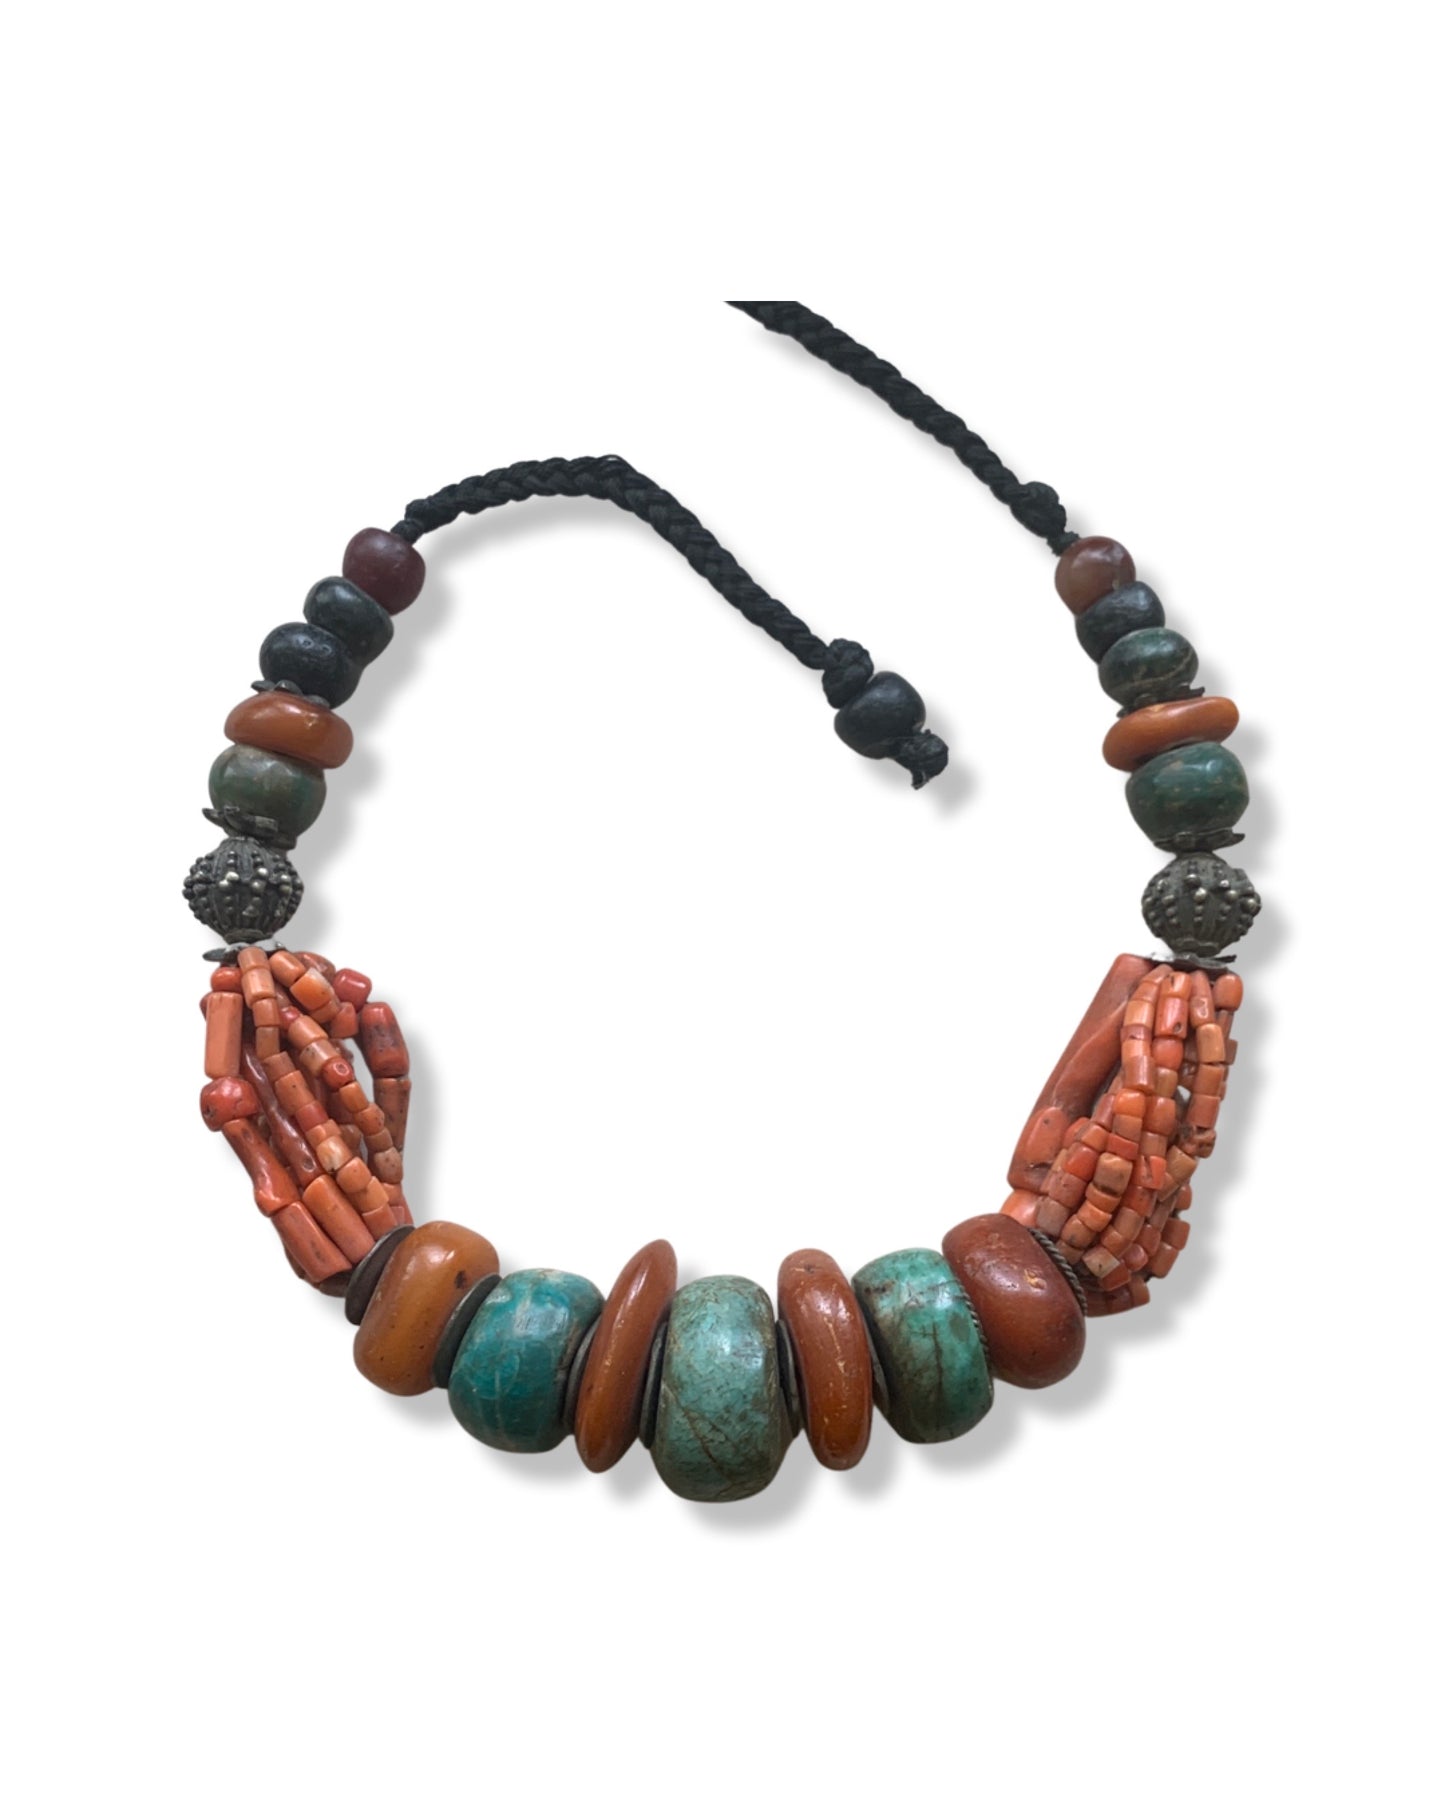 The Colors of Morocco... Ethnic Draa Valley Style Moroccan Necklace with Antique Elements in New Gallery Stringing